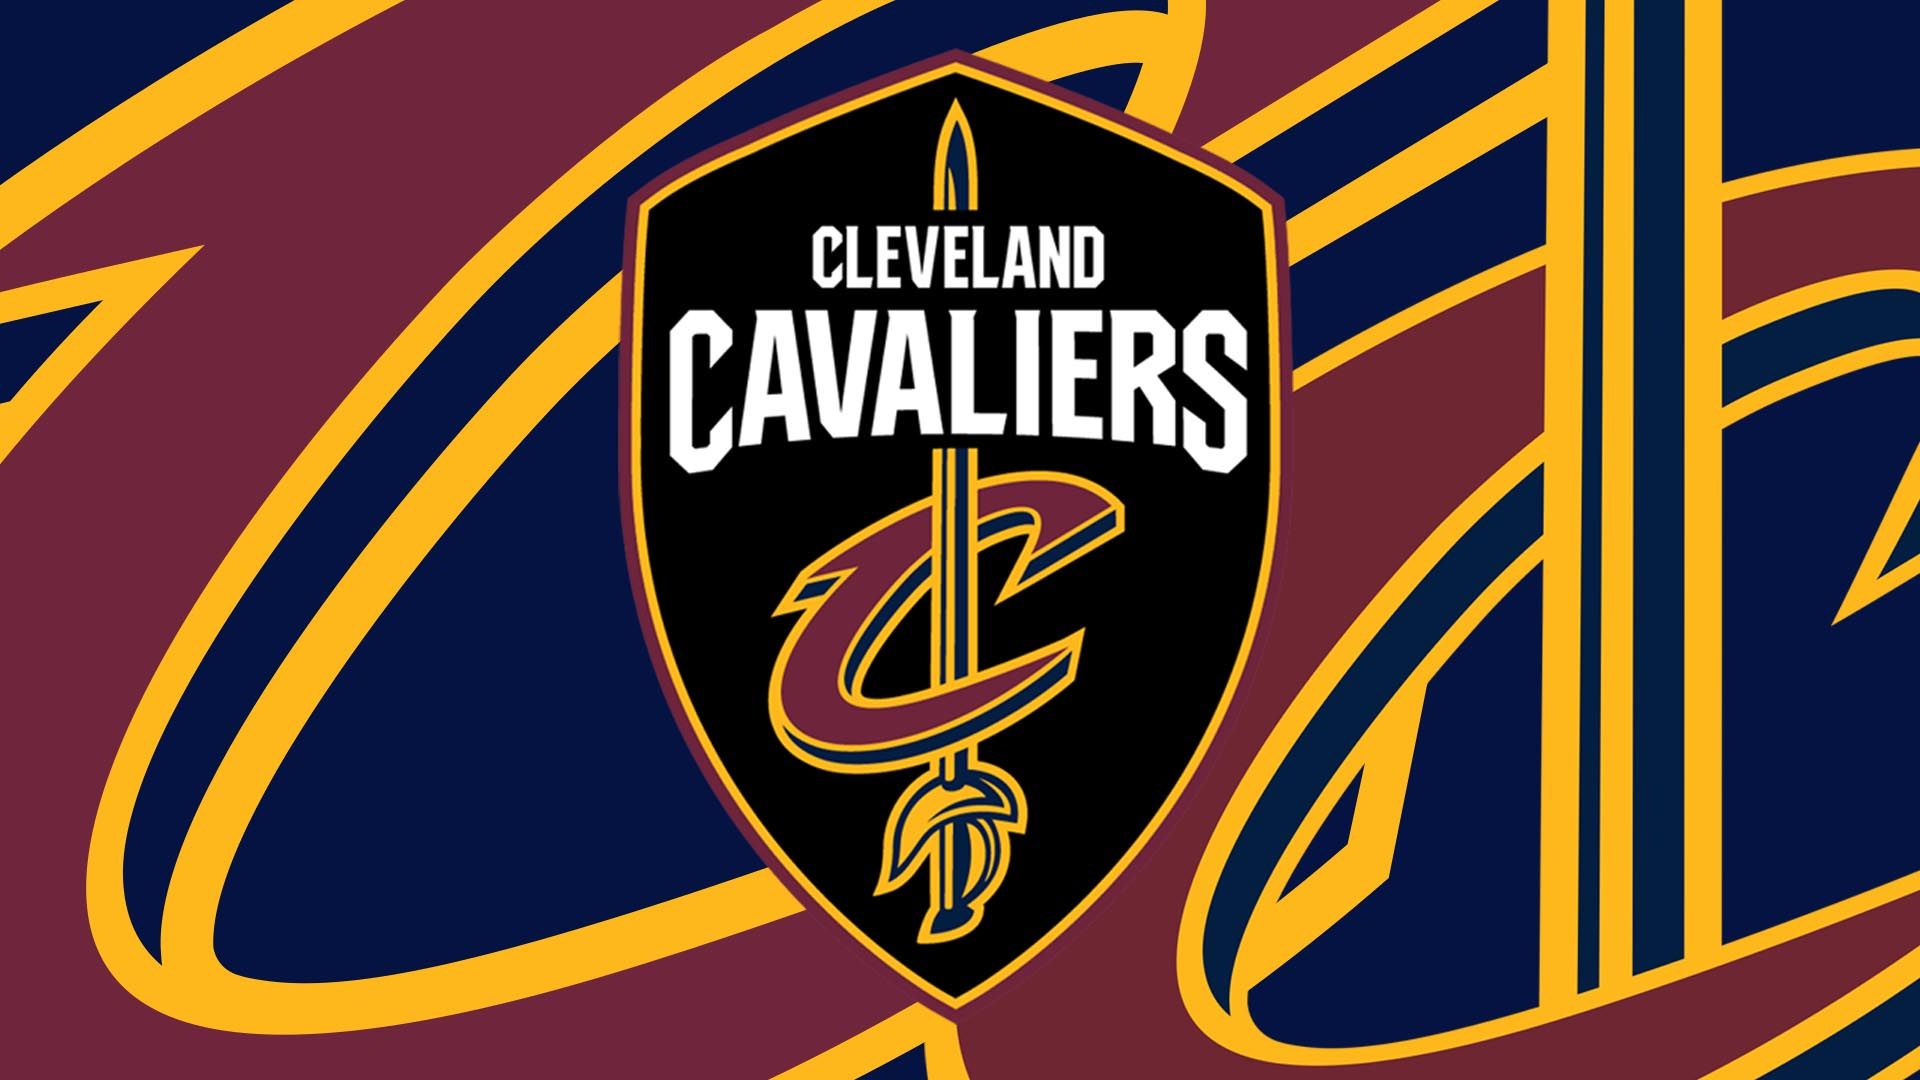 Cleveland Cavaliers For PC Wallpaper Basketball Wallpaper